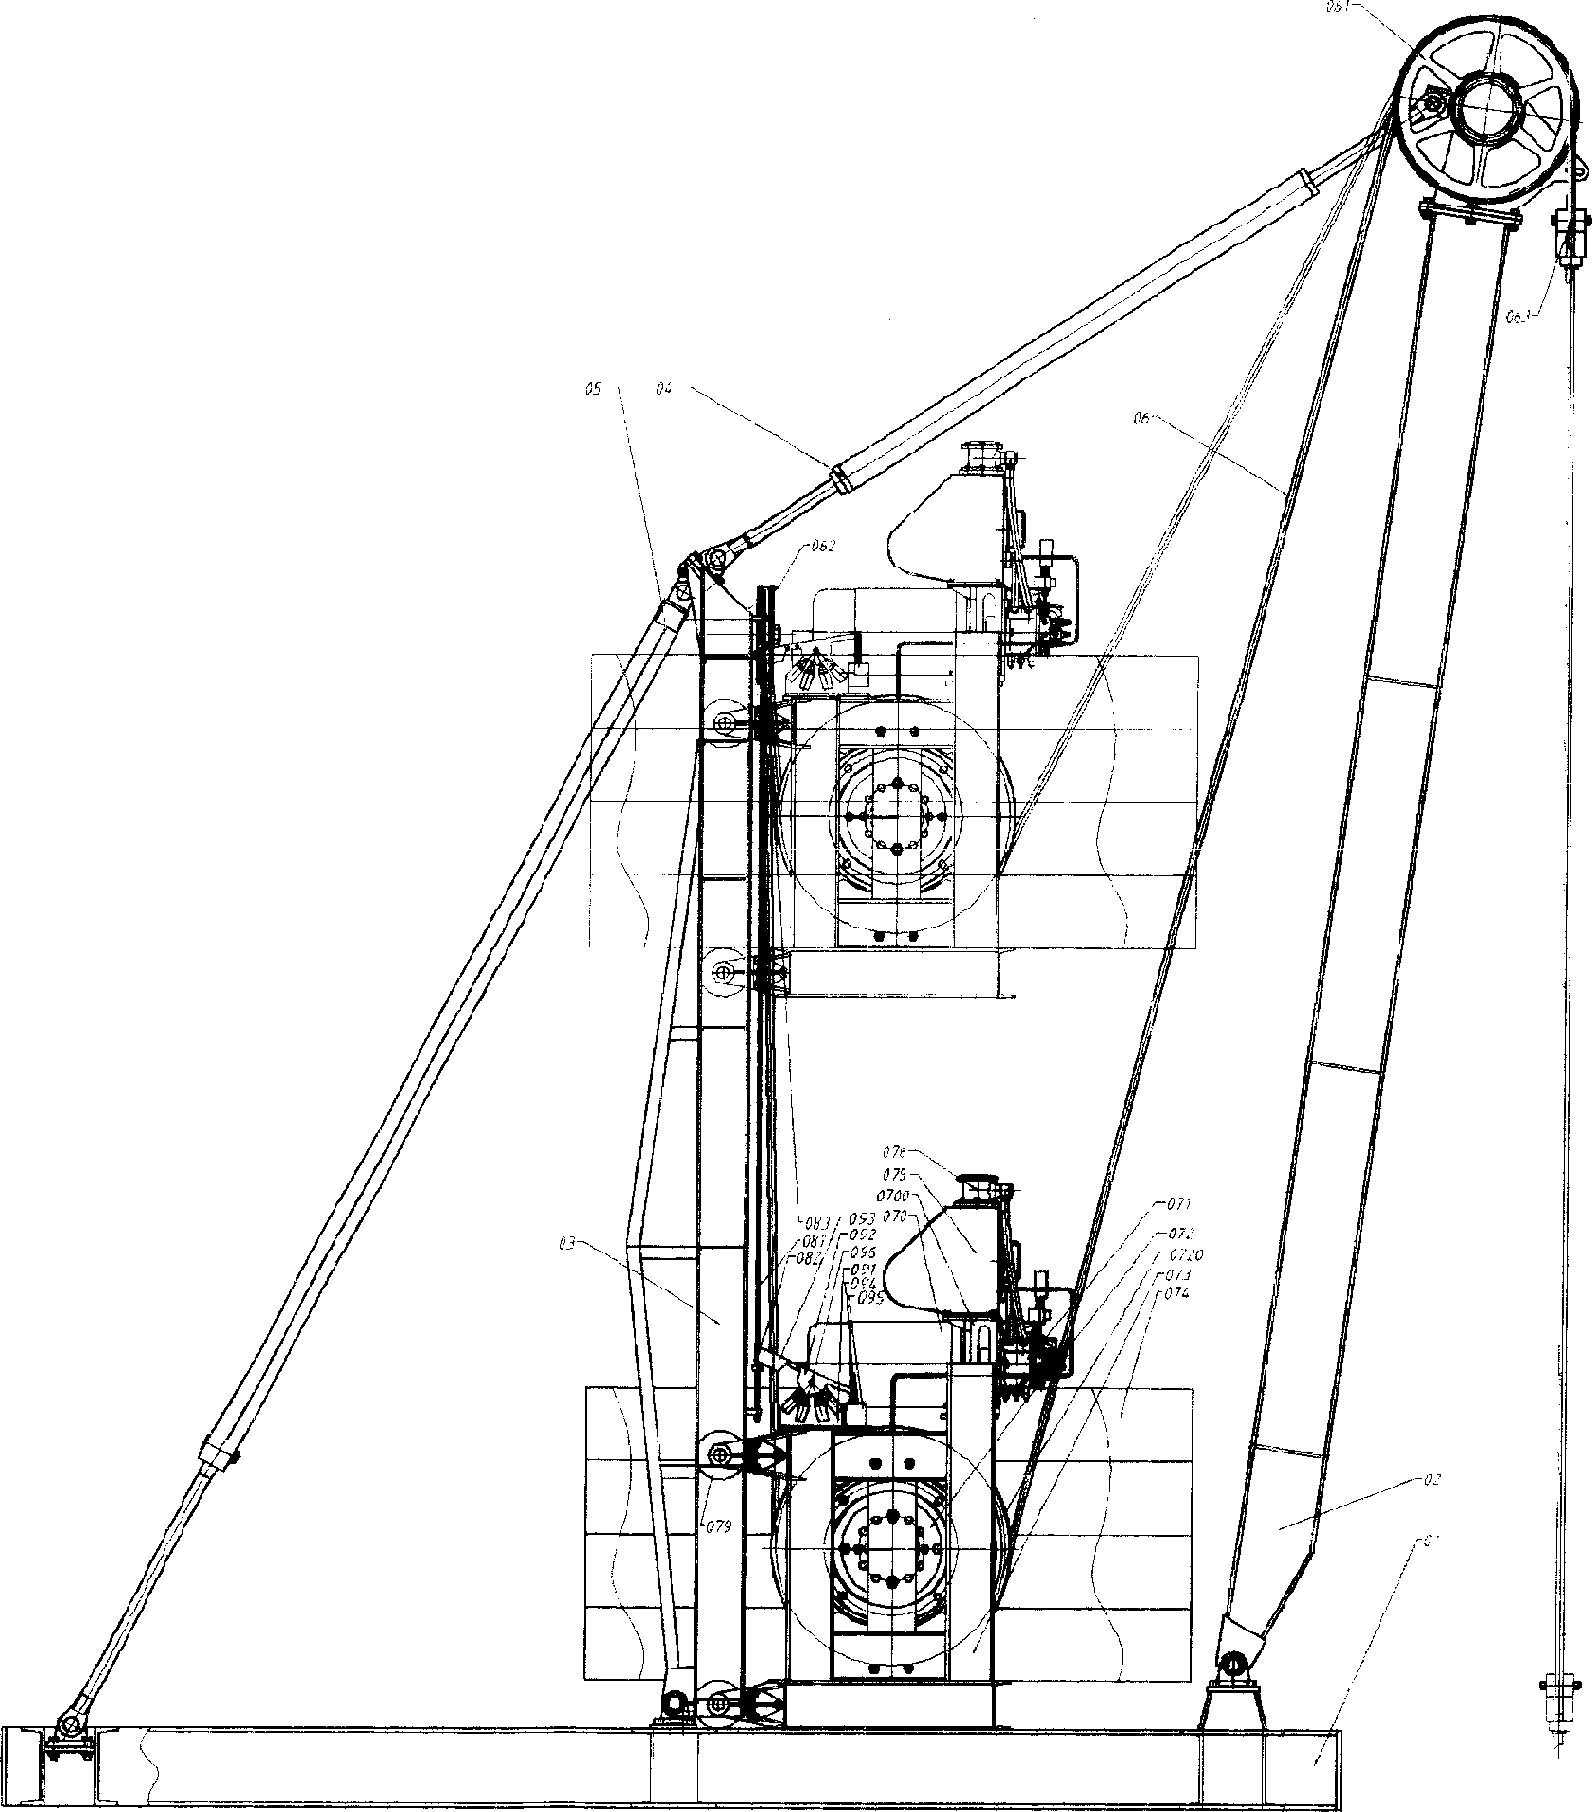 Reciprocating petroleum beam-pumping unit with hydraulic transmission